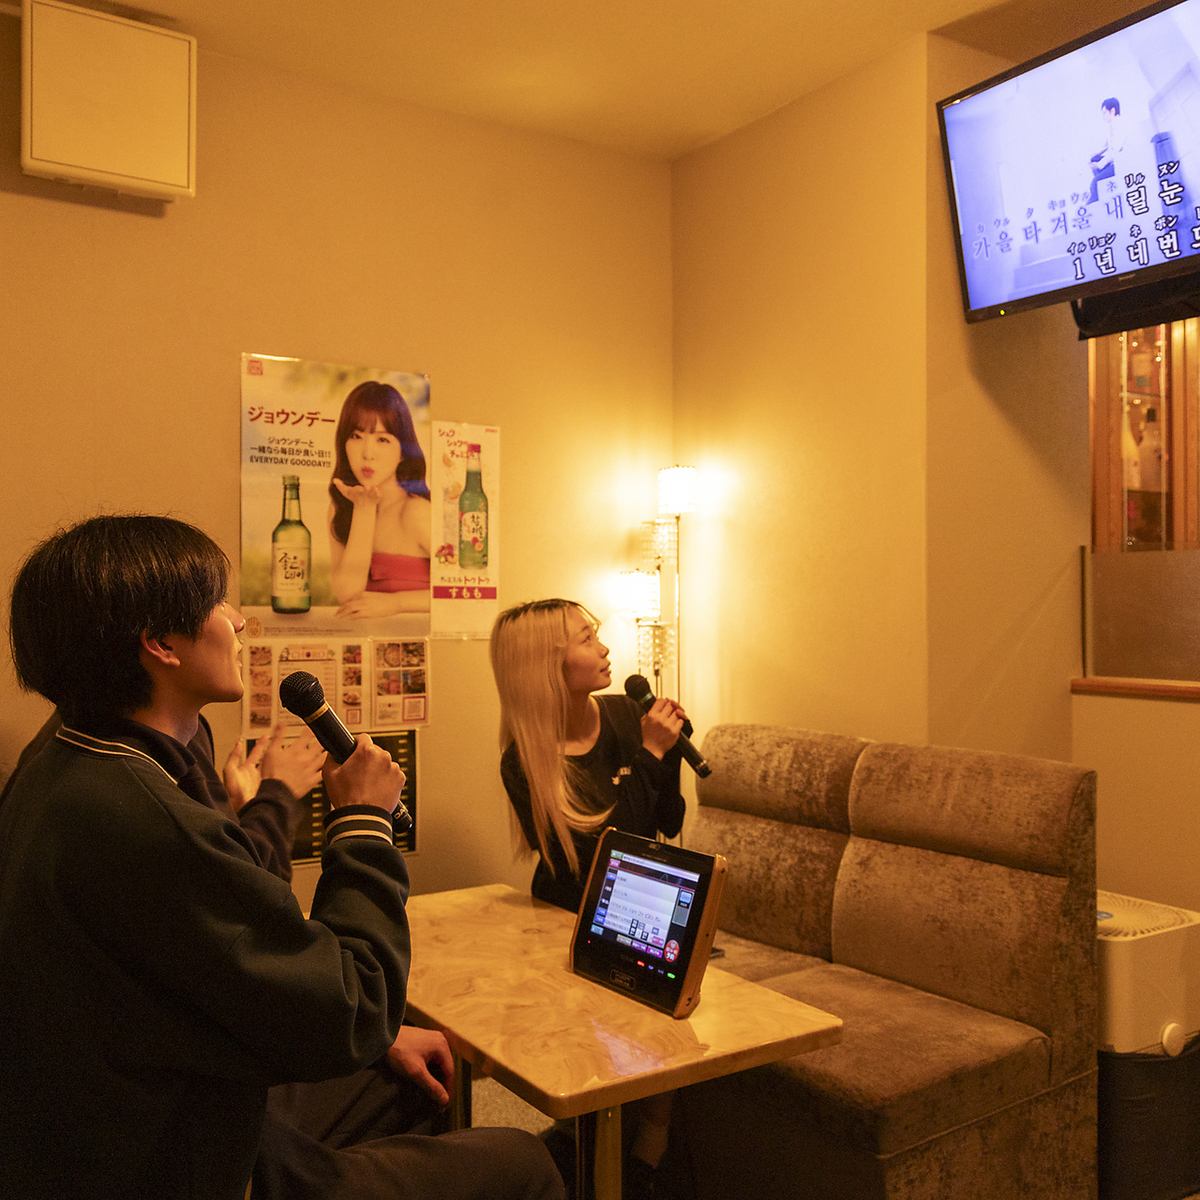 Enjoy all-you-can-sing karaoke at DAM! Can be reserved for groups of 8 or more♪